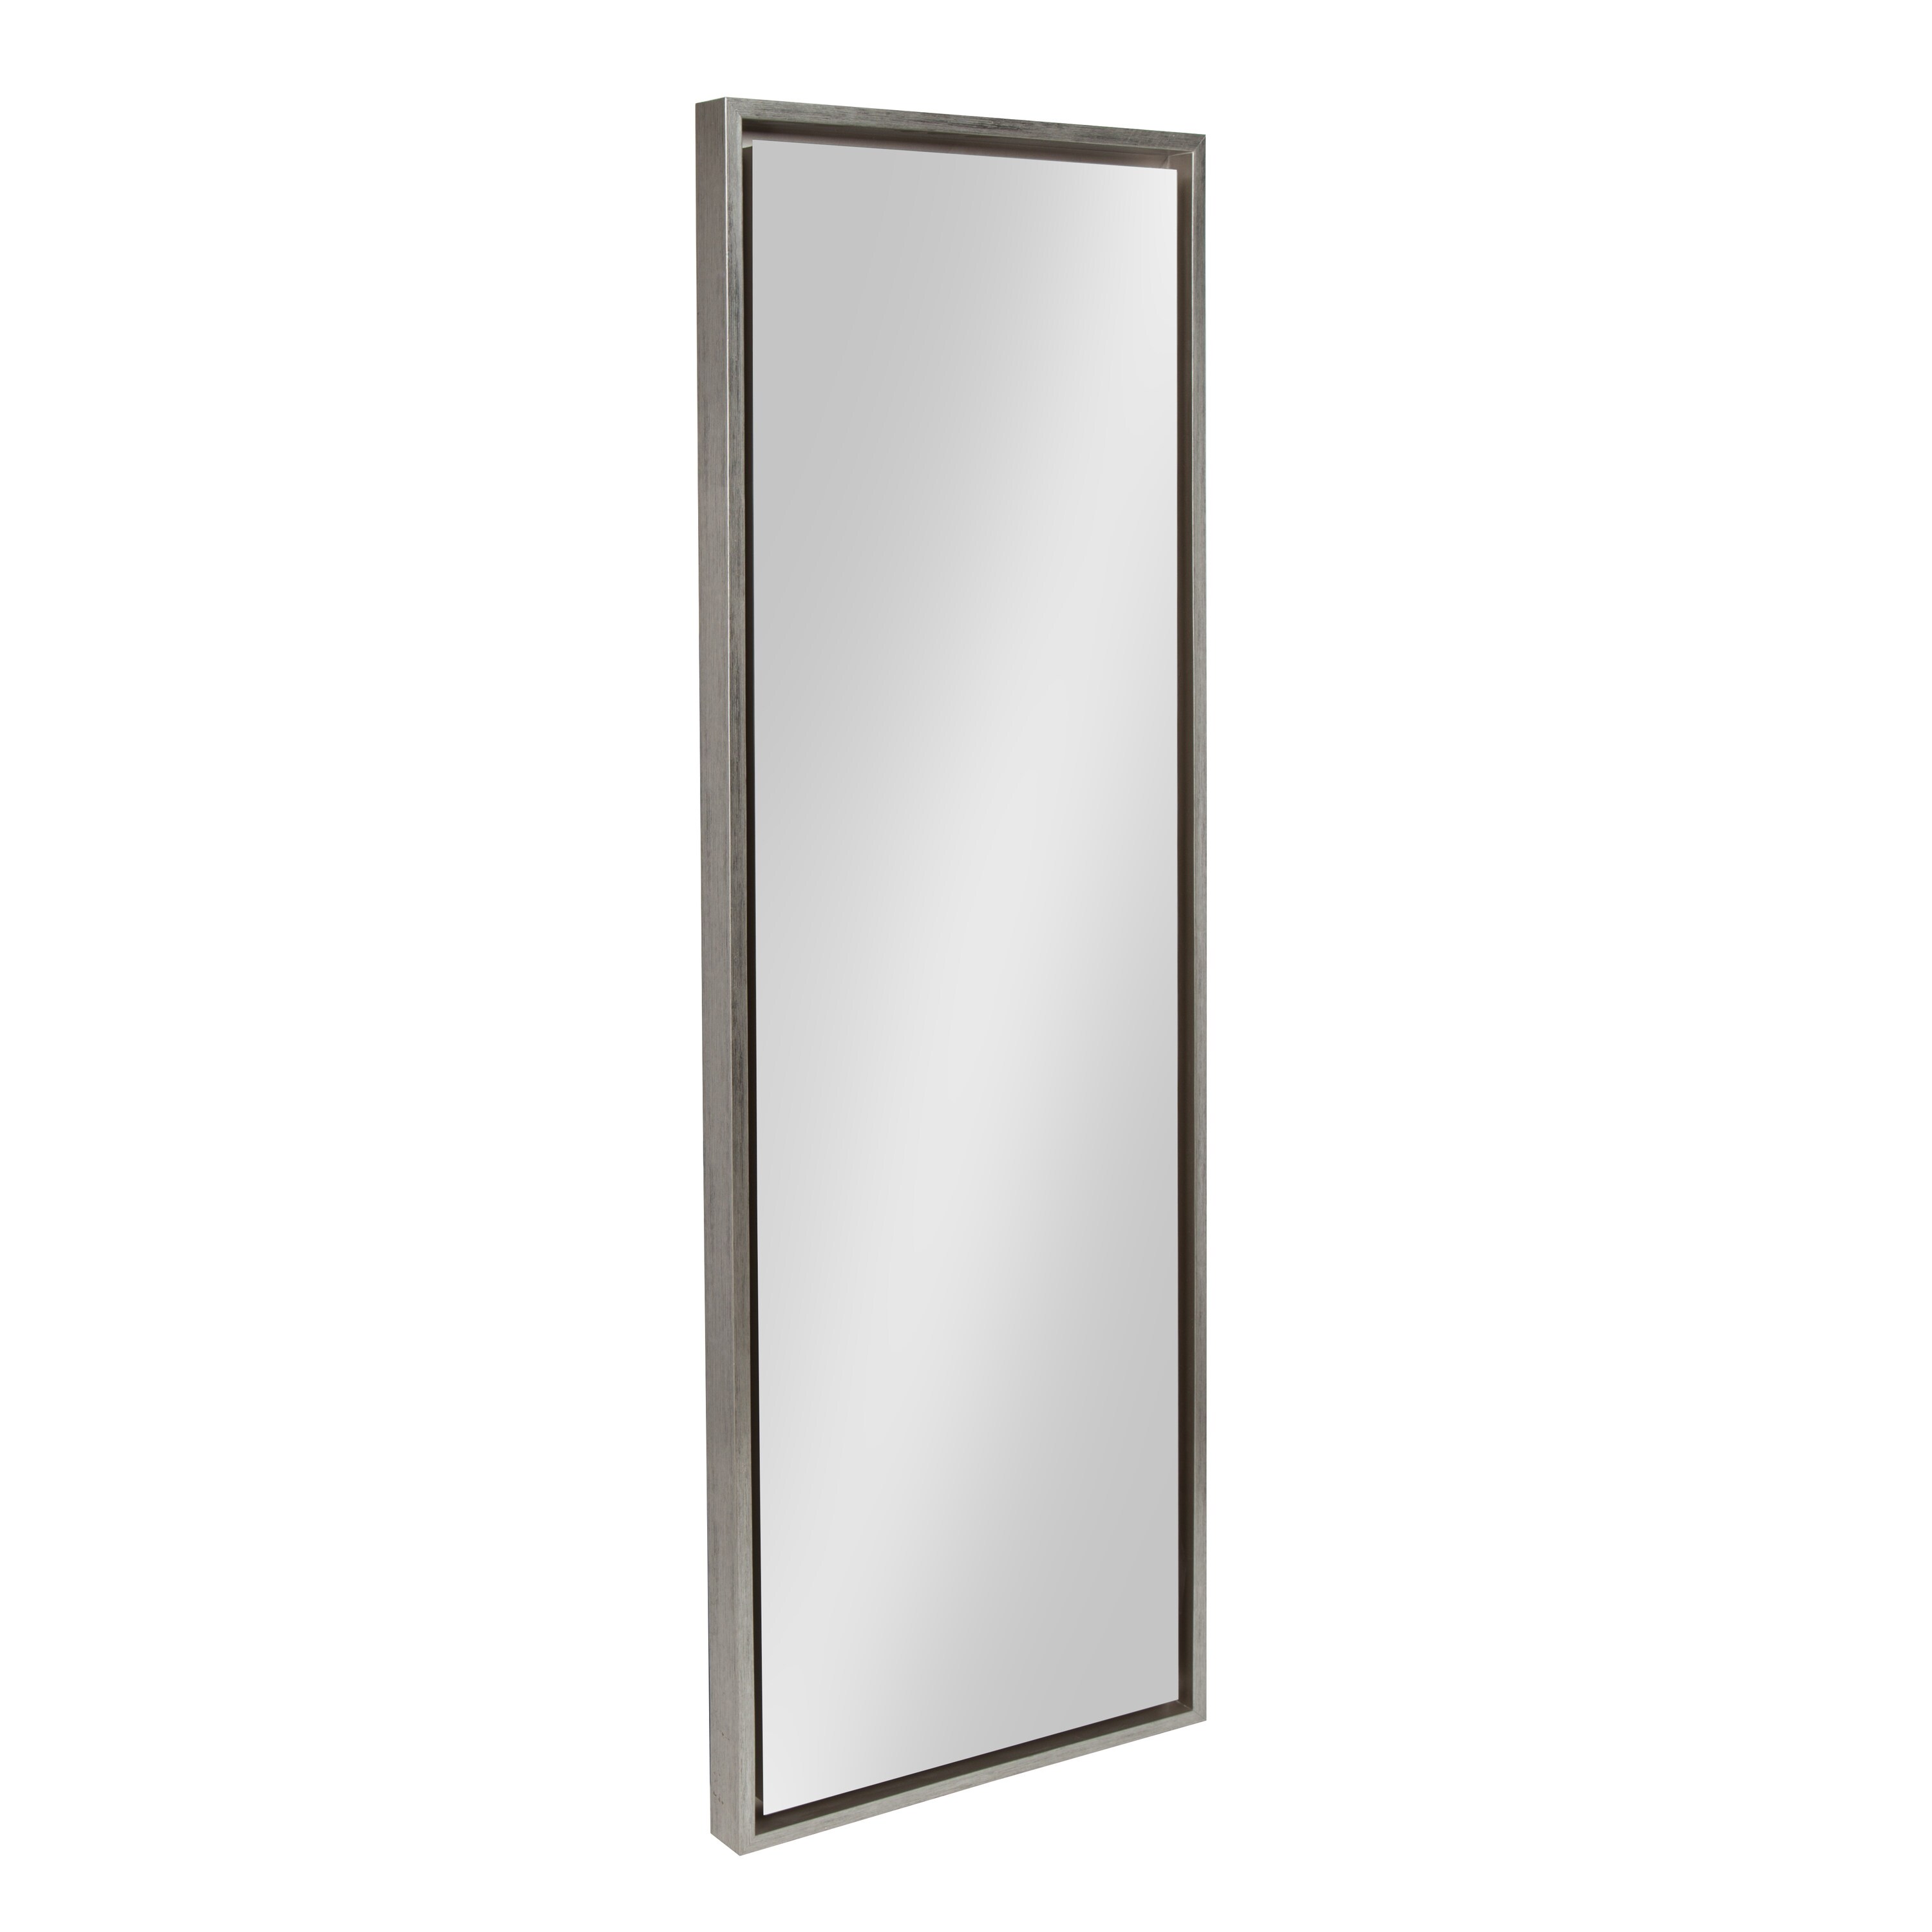 Evans Glam Mirrors at Lowes.com